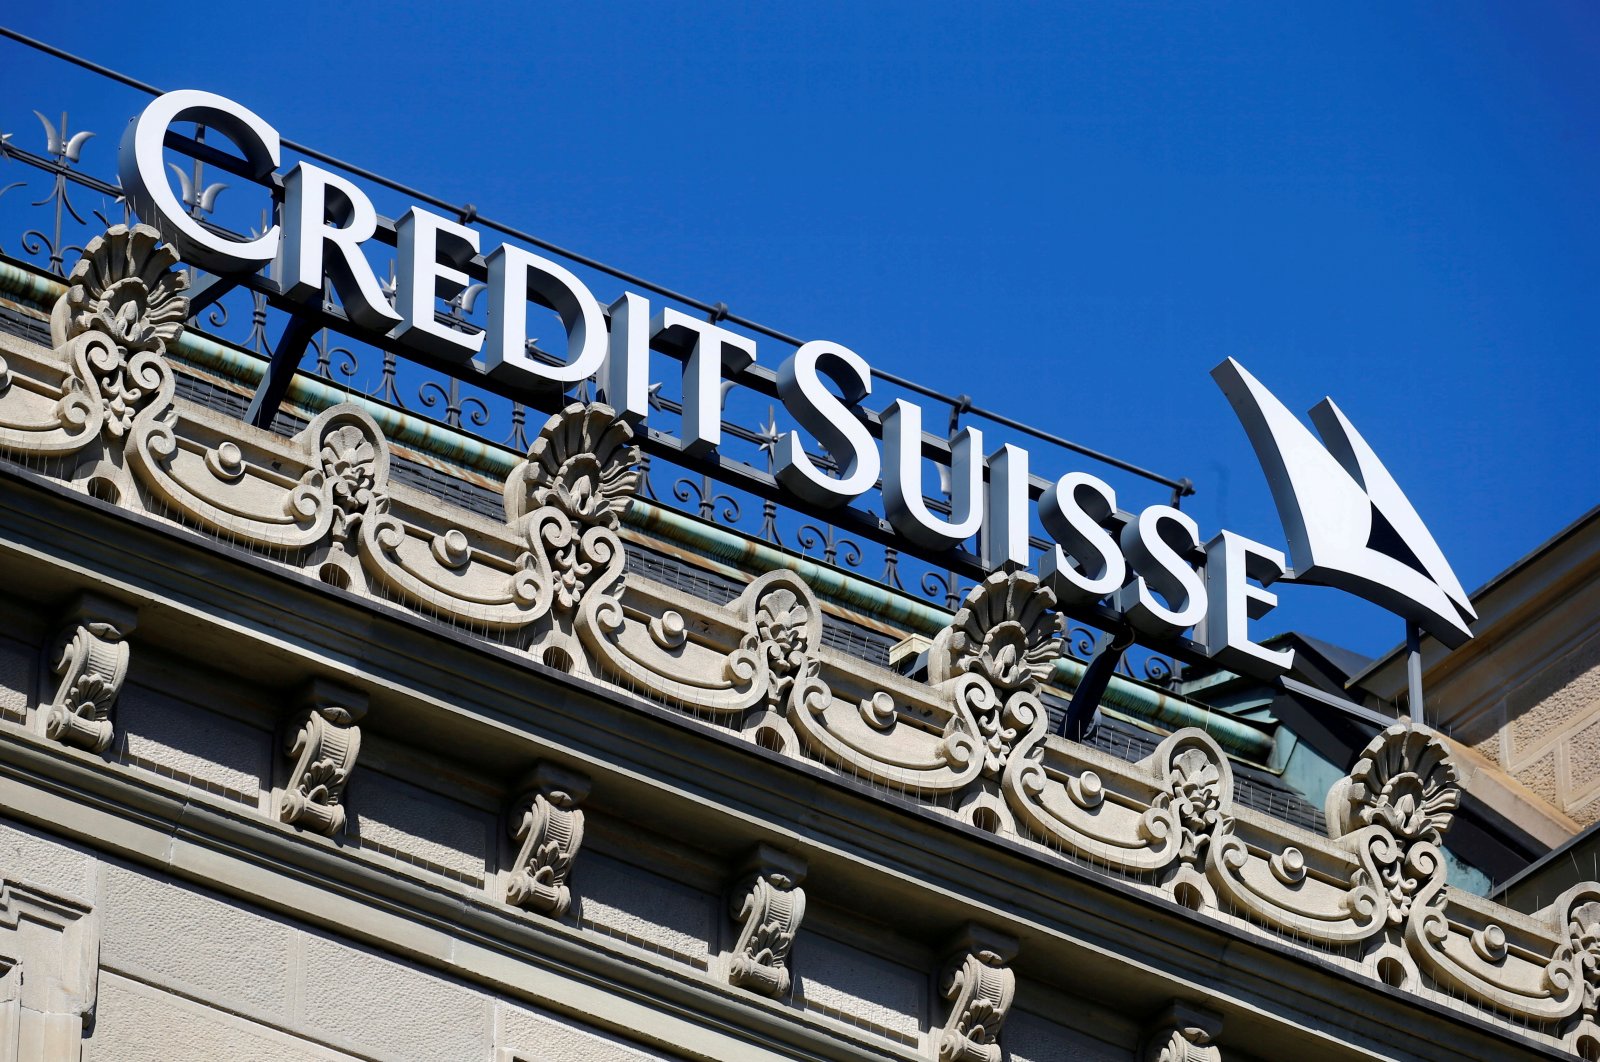 The logo of Swiss bank Credit Suisse is seen at its headquarters in Zurich, Switzerland, March 24, 2021. (Reuters Photo)